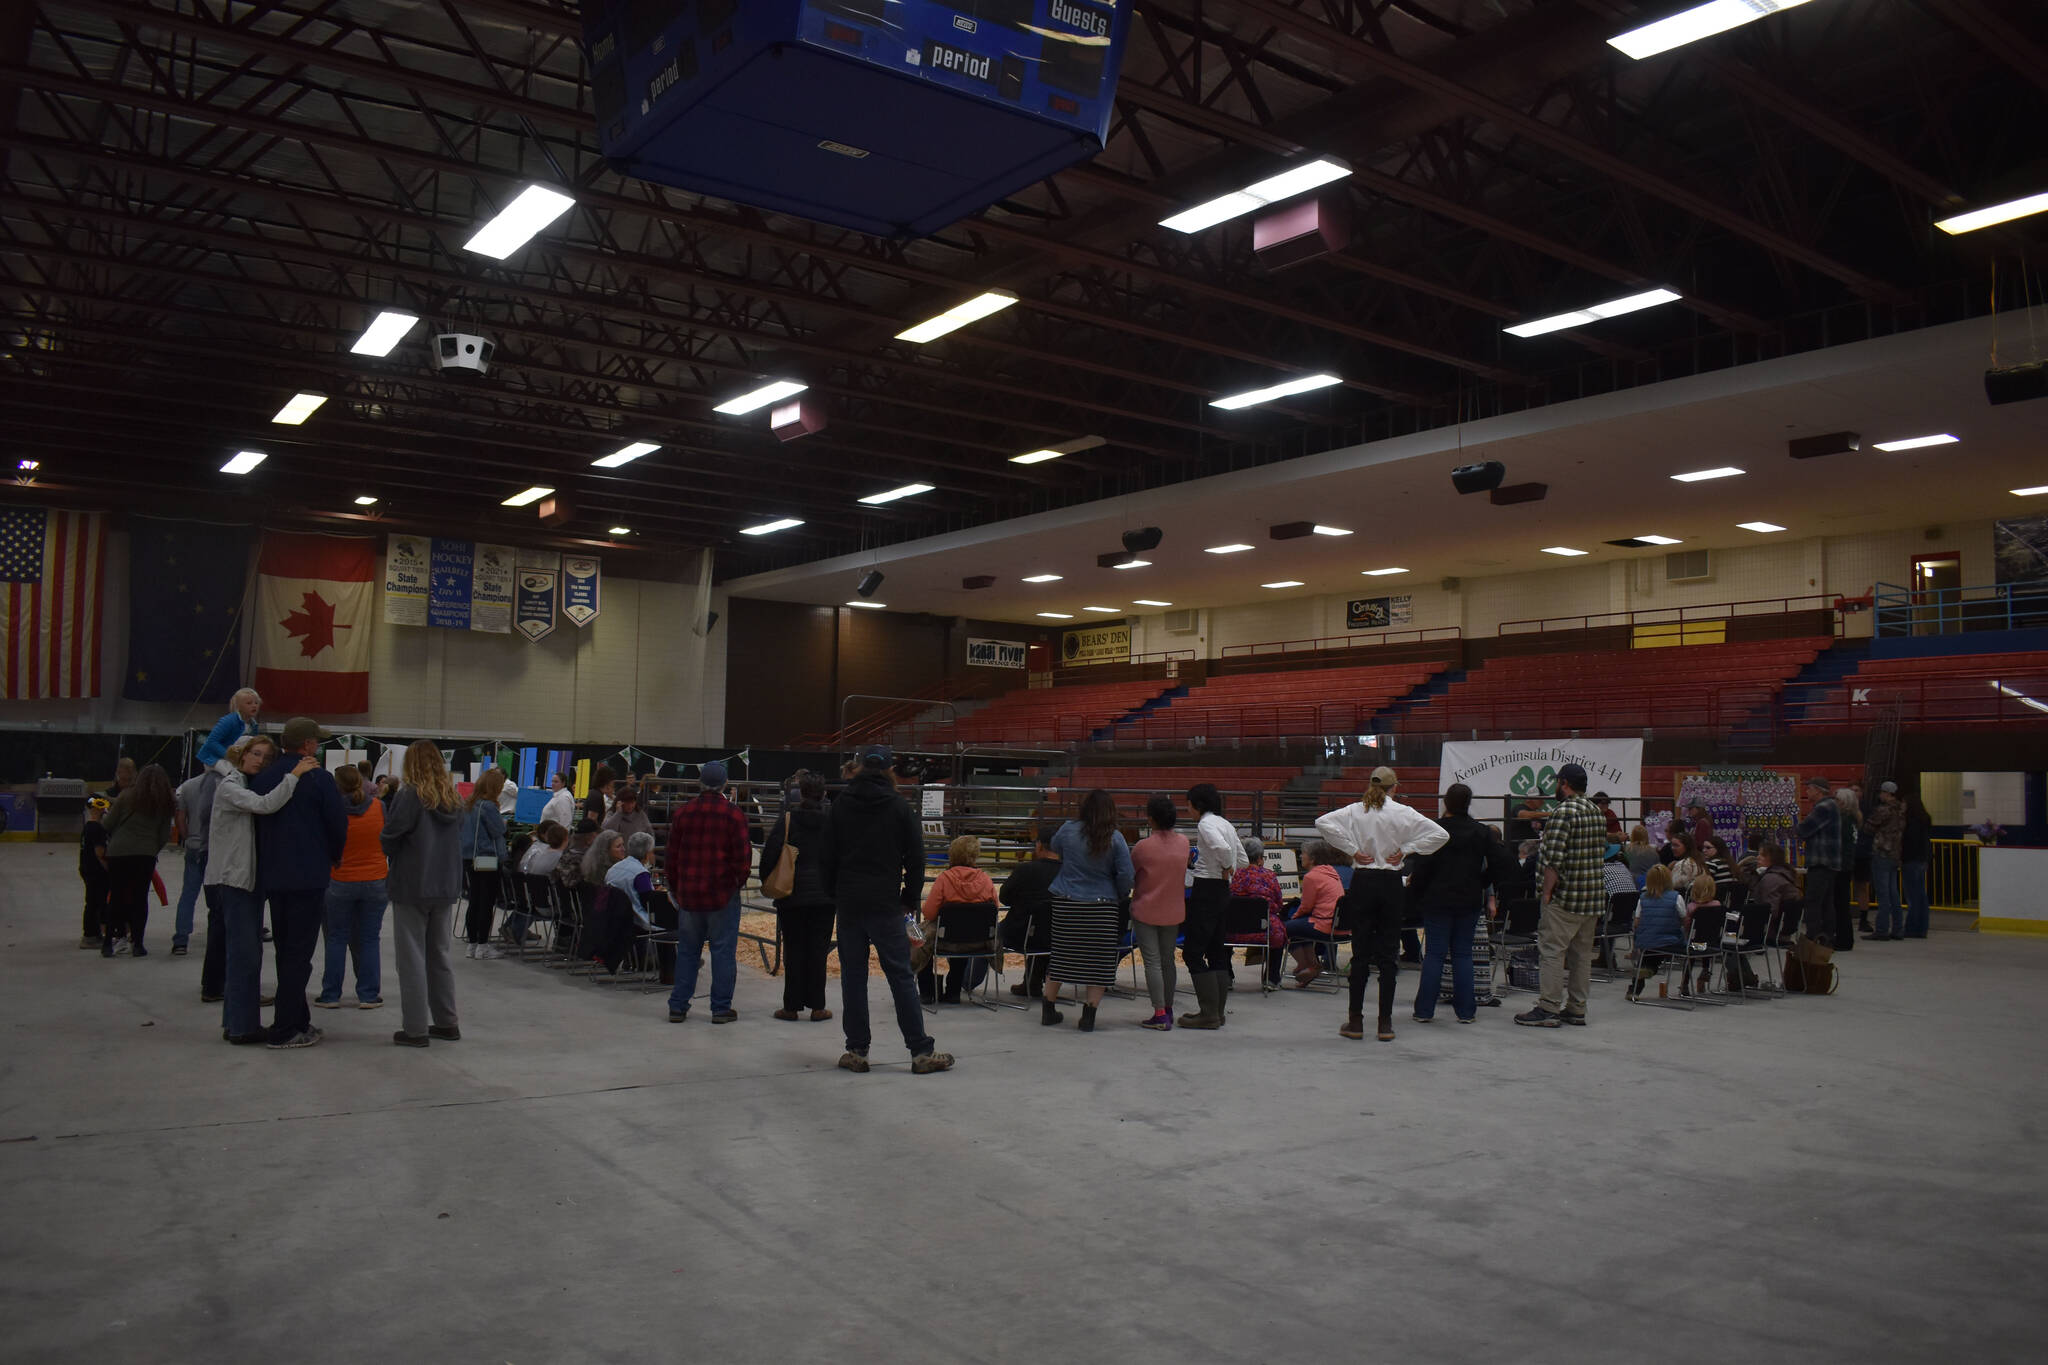 Attendees look on the arena where animals are being shown at the 4-H Agriculture Expo in Soldotna, Alaska, on Aug. 5, 2022. (Jake Dye/Peninsula Clarion)